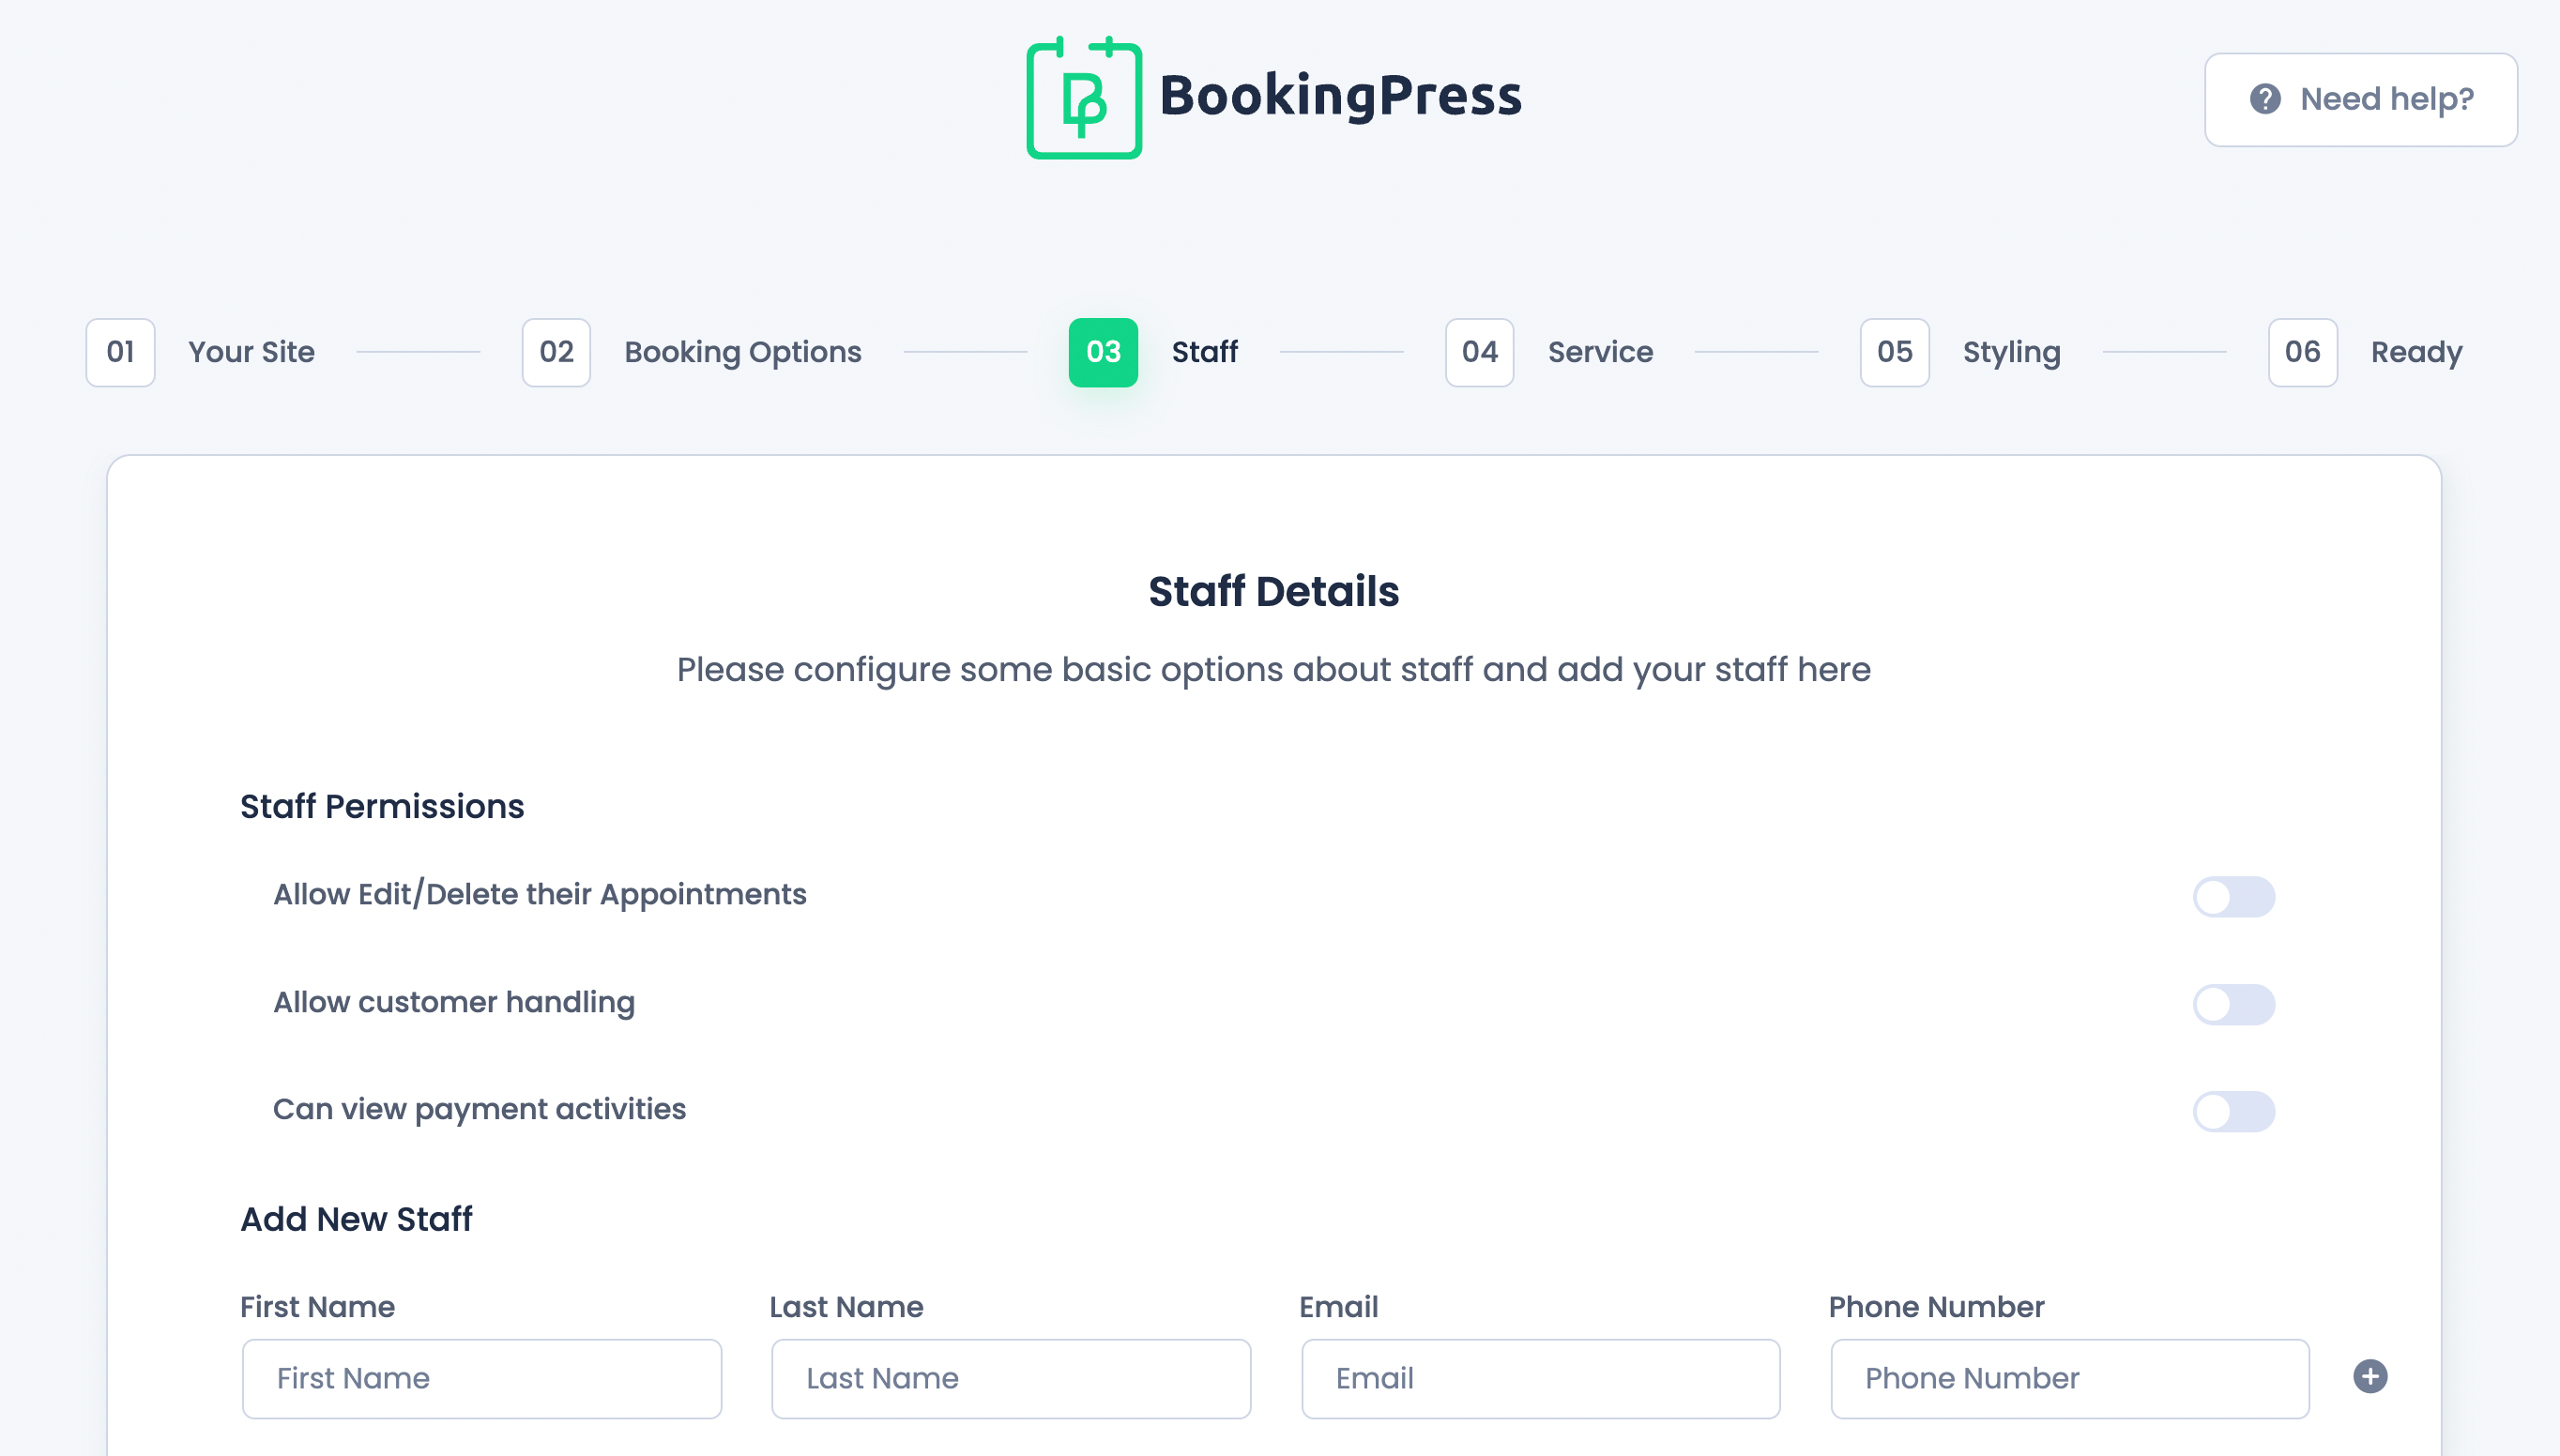 BookingPress Staff Details page